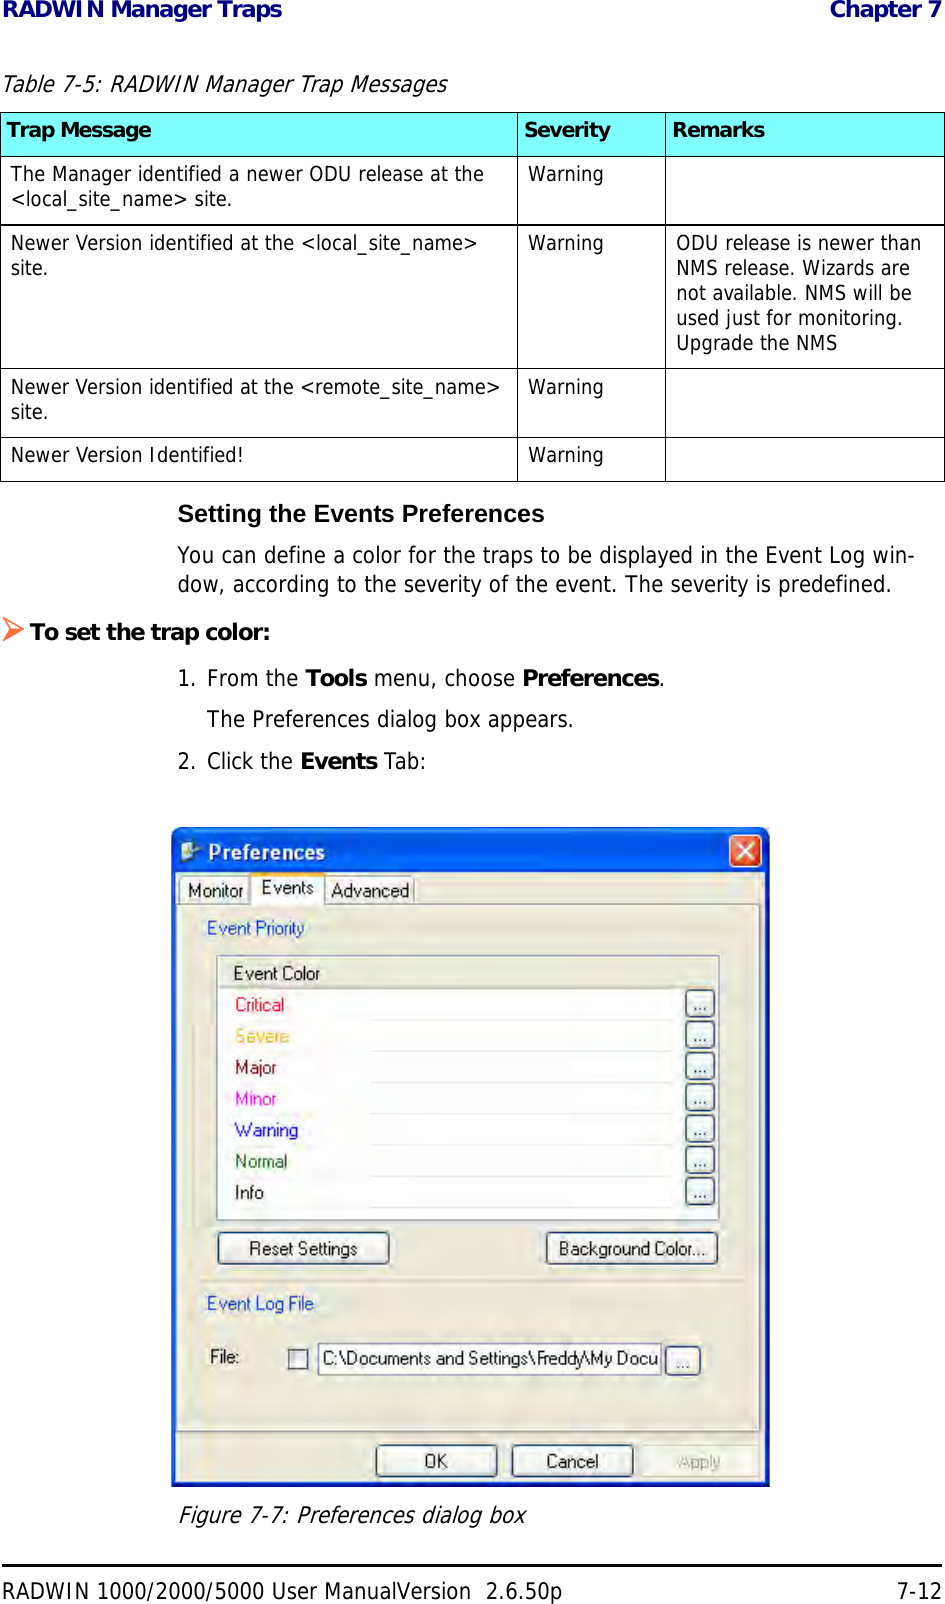 RADWIN Manager Traps  Chapter 7RADWIN 1000/2000/5000 User ManualVersion  2.6.50p 7-12Setting the Events PreferencesYou can define a color for the traps to be displayed in the Event Log win-dow, according to the severity of the event. The severity is predefined.To set the trap color:1. From the Tools menu, choose Preferences.The Preferences dialog box appears.2. Click the Events Tab:Figure 7-7: Preferences dialog boxThe Manager identified a newer ODU release at the &lt;local_site_name&gt; site. WarningNewer Version identified at the &lt;local_site_name&gt; site. Warning ODU release is newer than NMS release. Wizards are not available. NMS will be used just for monitoring. Upgrade the NMSNewer Version identified at the &lt;remote_site_name&gt; site. WarningNewer Version Identified! WarningTable 7-5: RADWIN Manager Trap MessagesTrap Message Severity Remarks